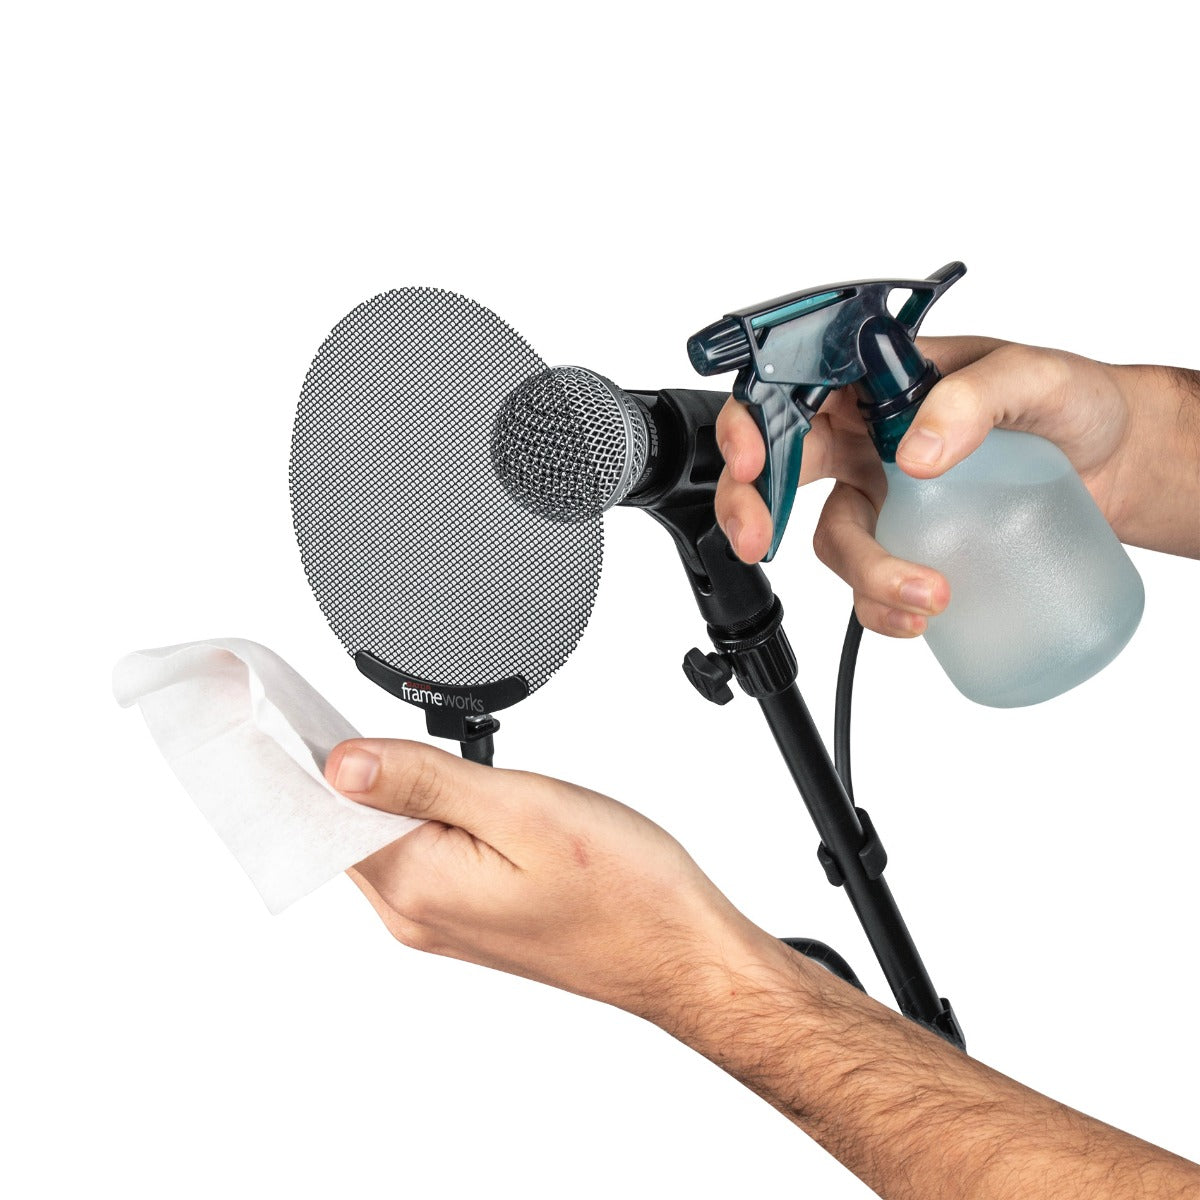 Human hands holding spray bottle and cloth preparing to clean the pop filter